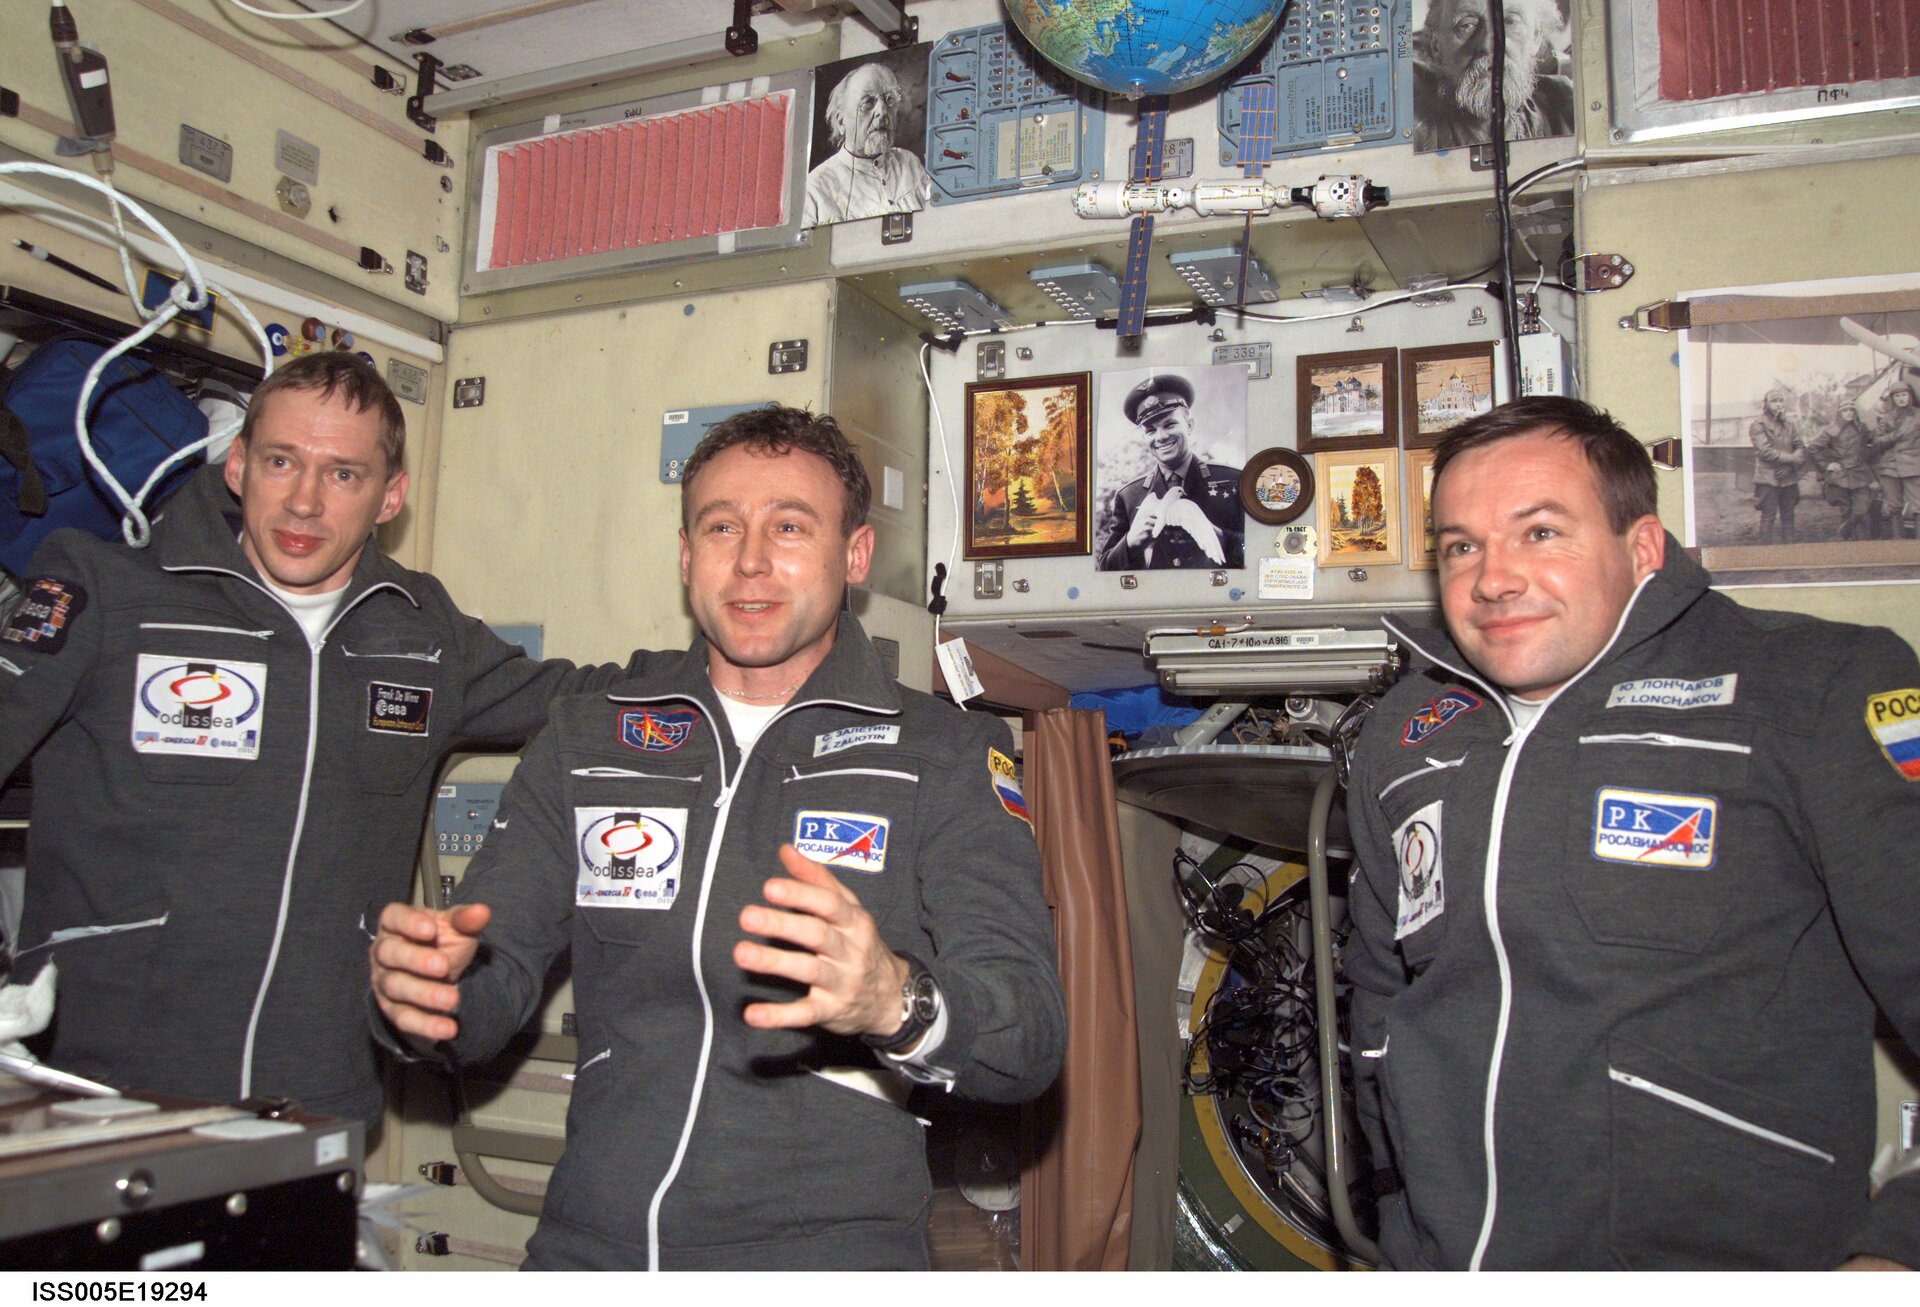 Odissea crew shortly after entering ISS